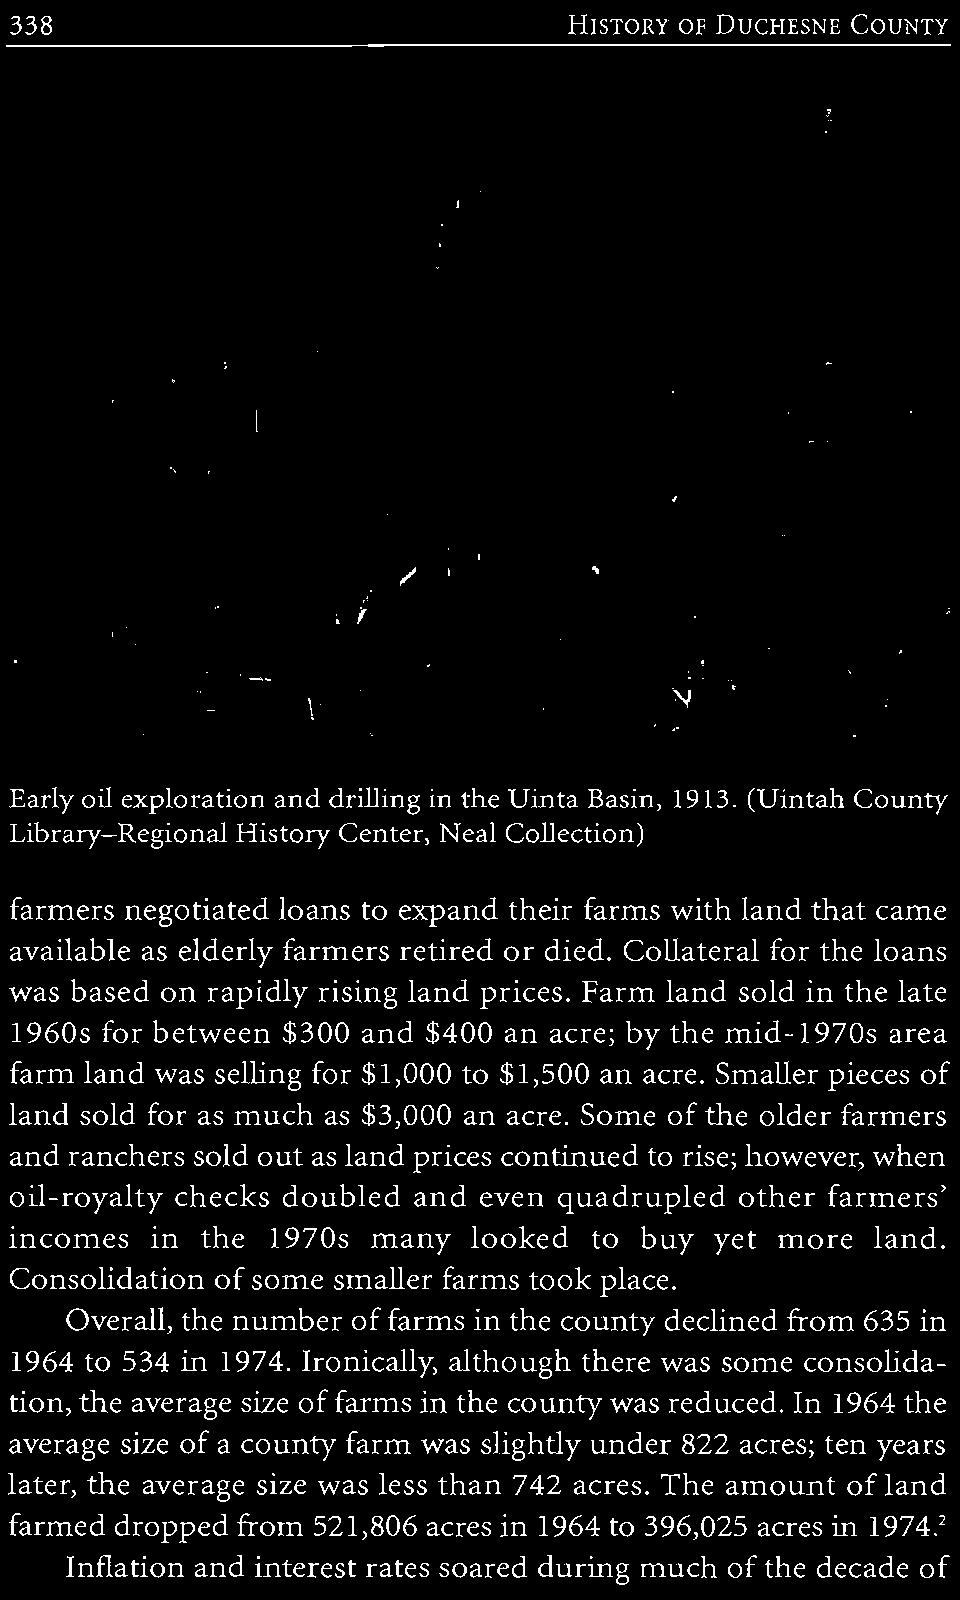 Some of the older farmers and ranchers sold out as land prices continued to rise; however, when oil-royalty checks doubled and even quadrupled other farmers' incomes in the 1970s many looked to buy